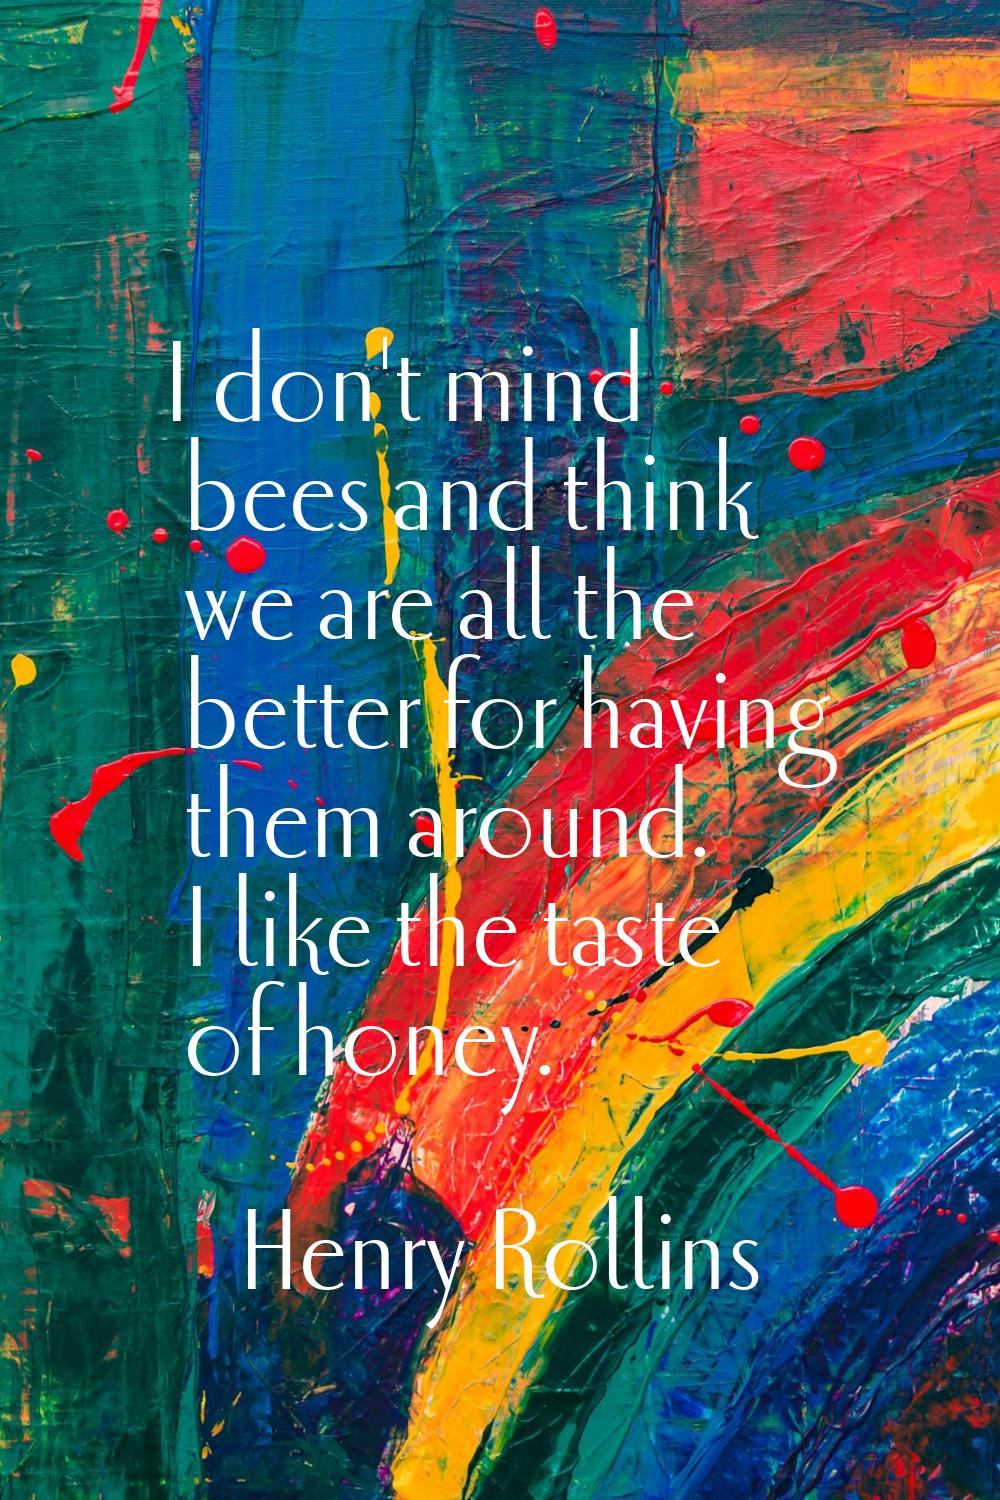 I don't mind bees and think we are all the better for having them around. I like the taste of honey